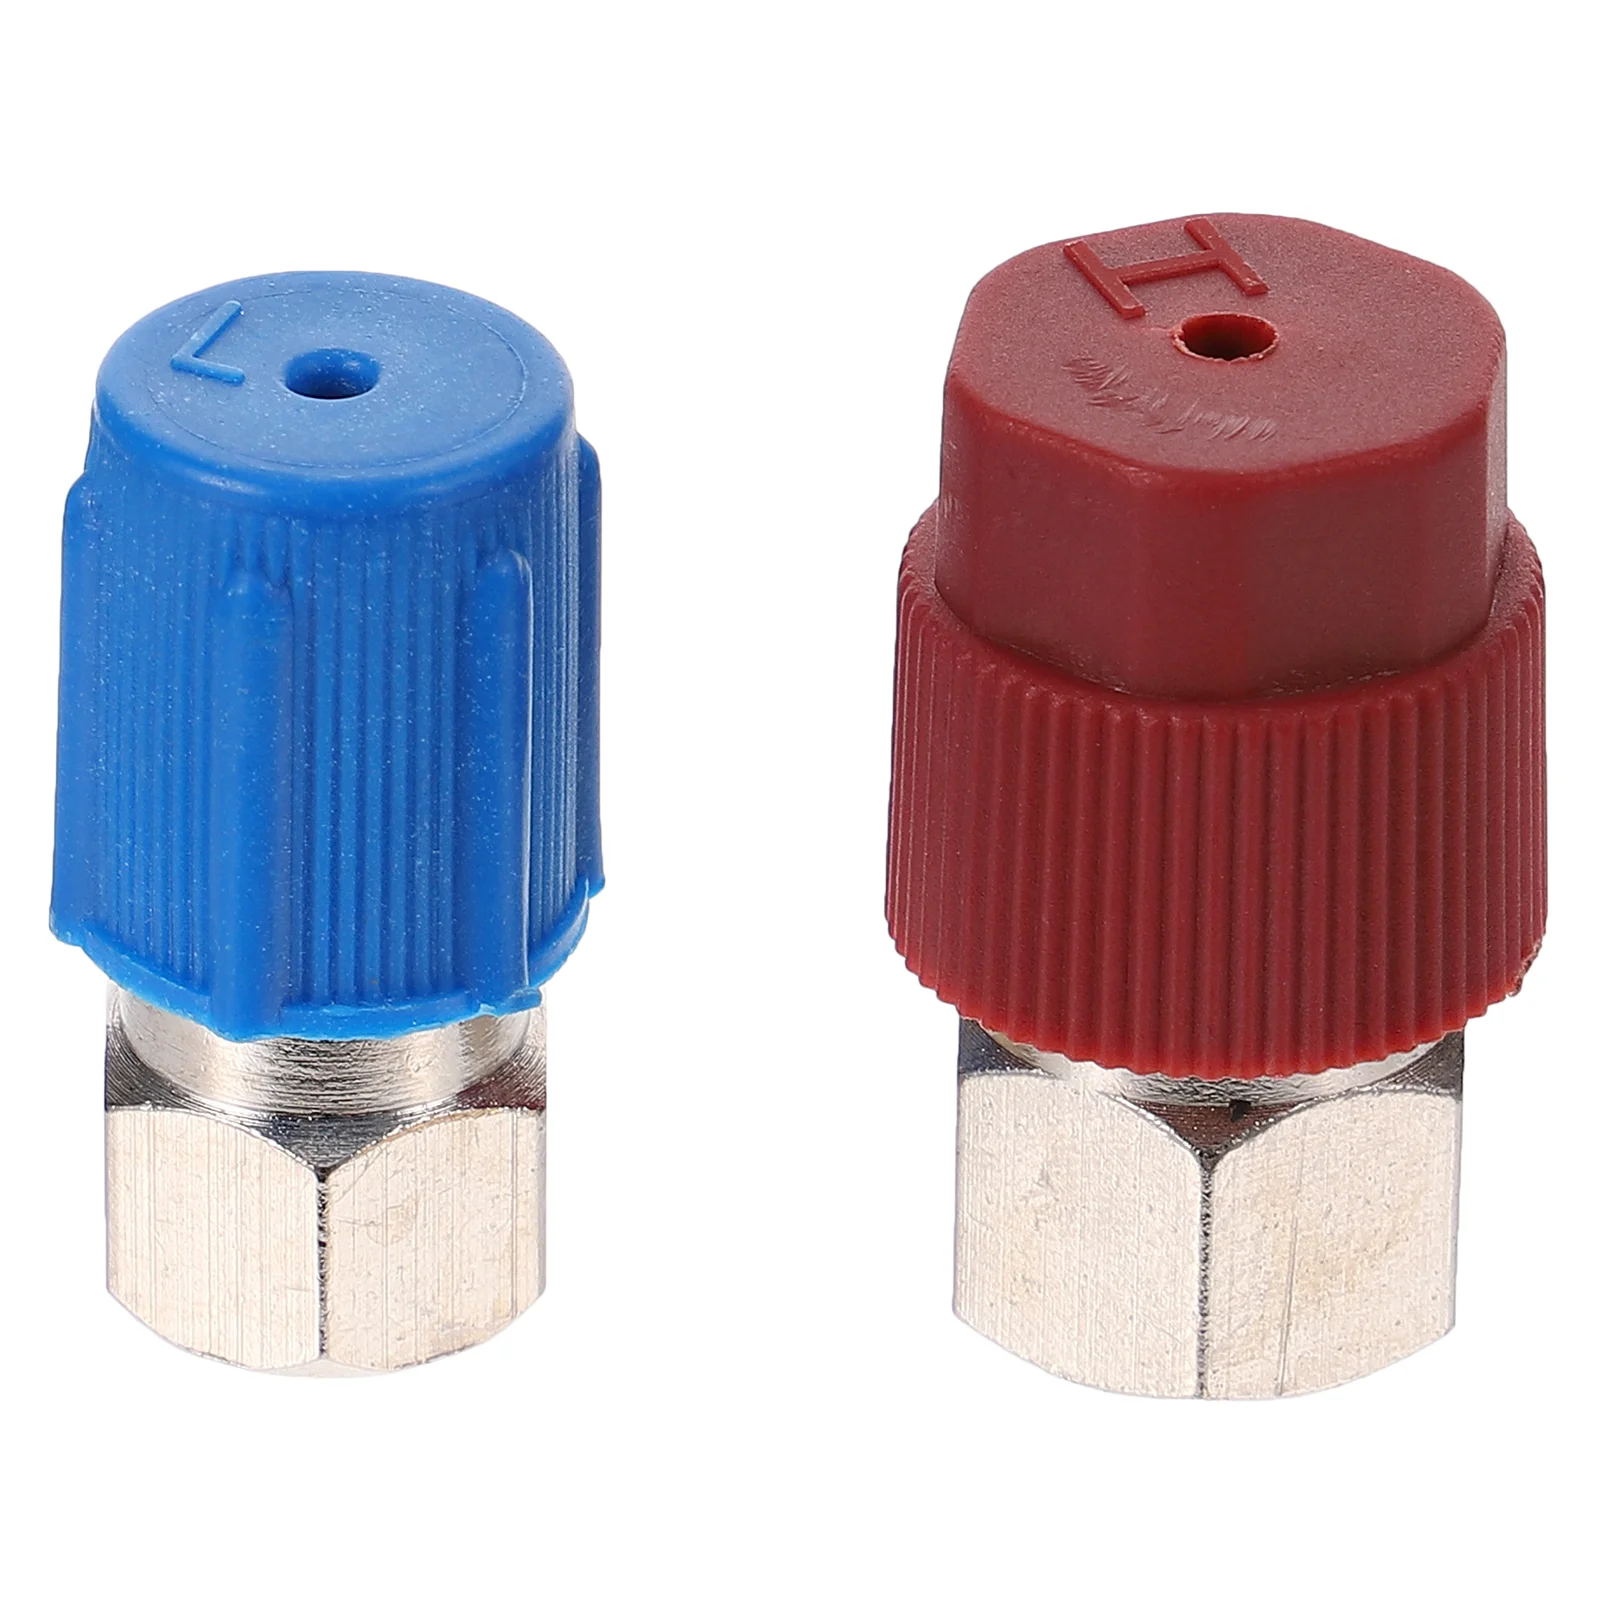 

2 Pcs Switch Mouth Gauge Kit Air Conditioner Manifold Coupler Quick Connector Hose Plastic Car Conditioning Adapters